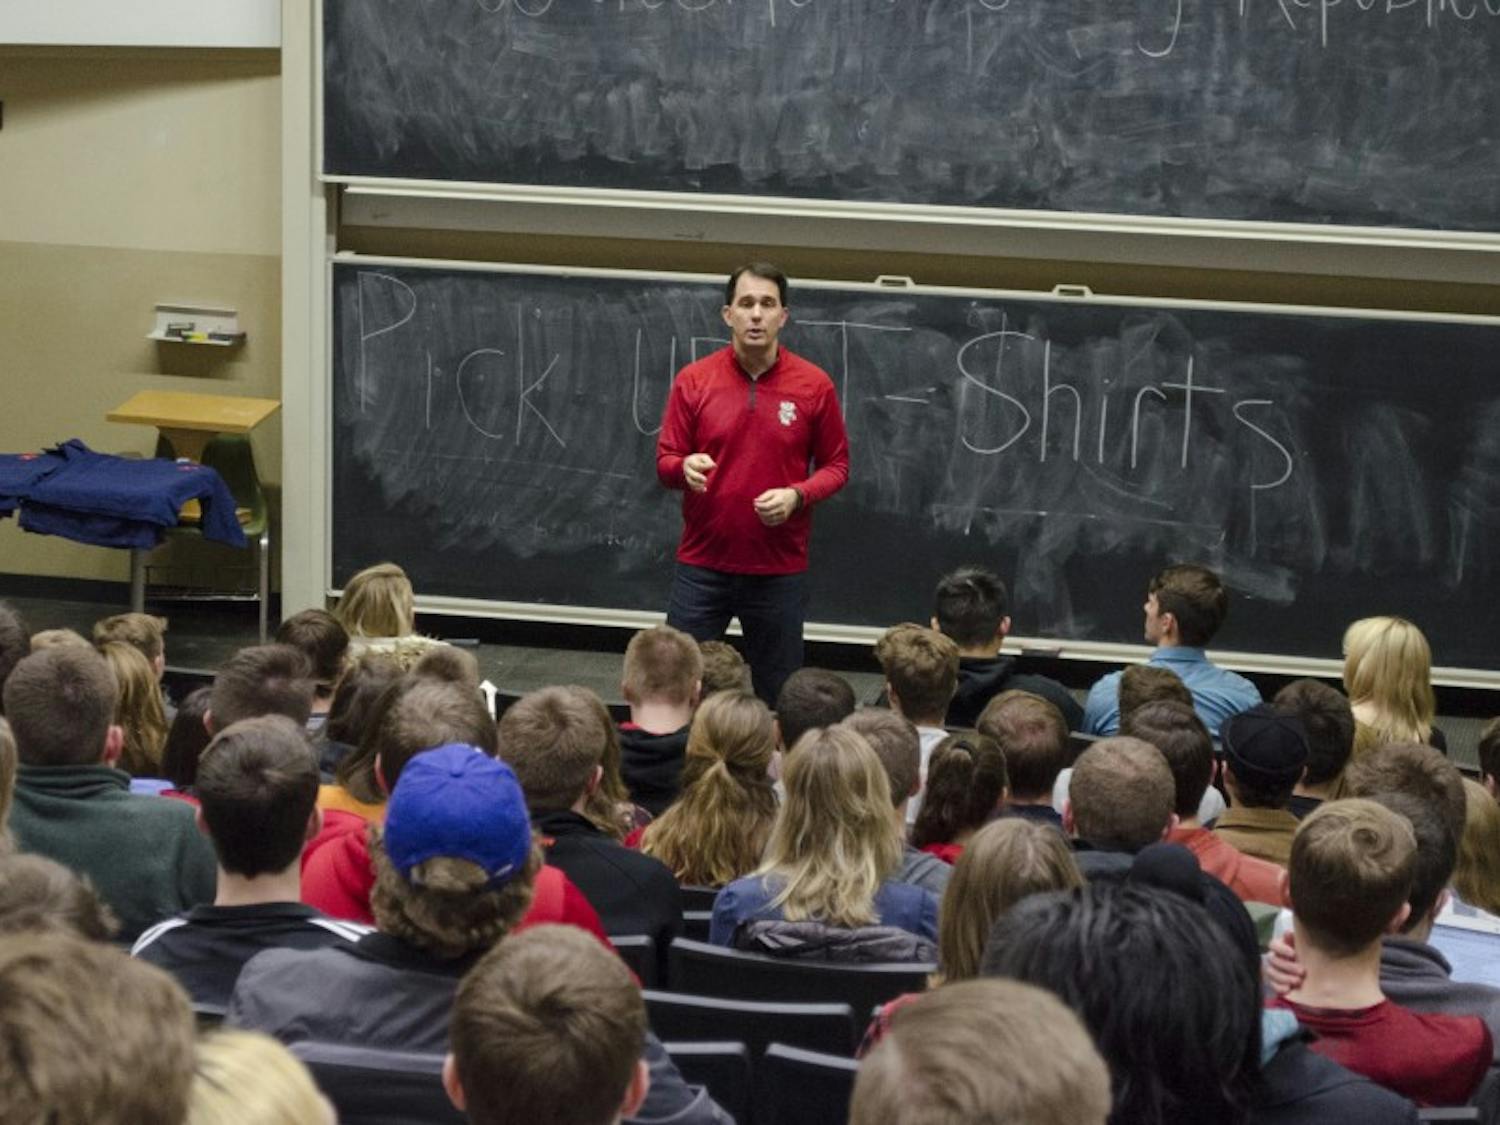 Gov. Scott Walker spoke to students at the College Republicans spring kick-off event, intending to mobilize young conservatives in the midst of a potentially difficult state election cycle.